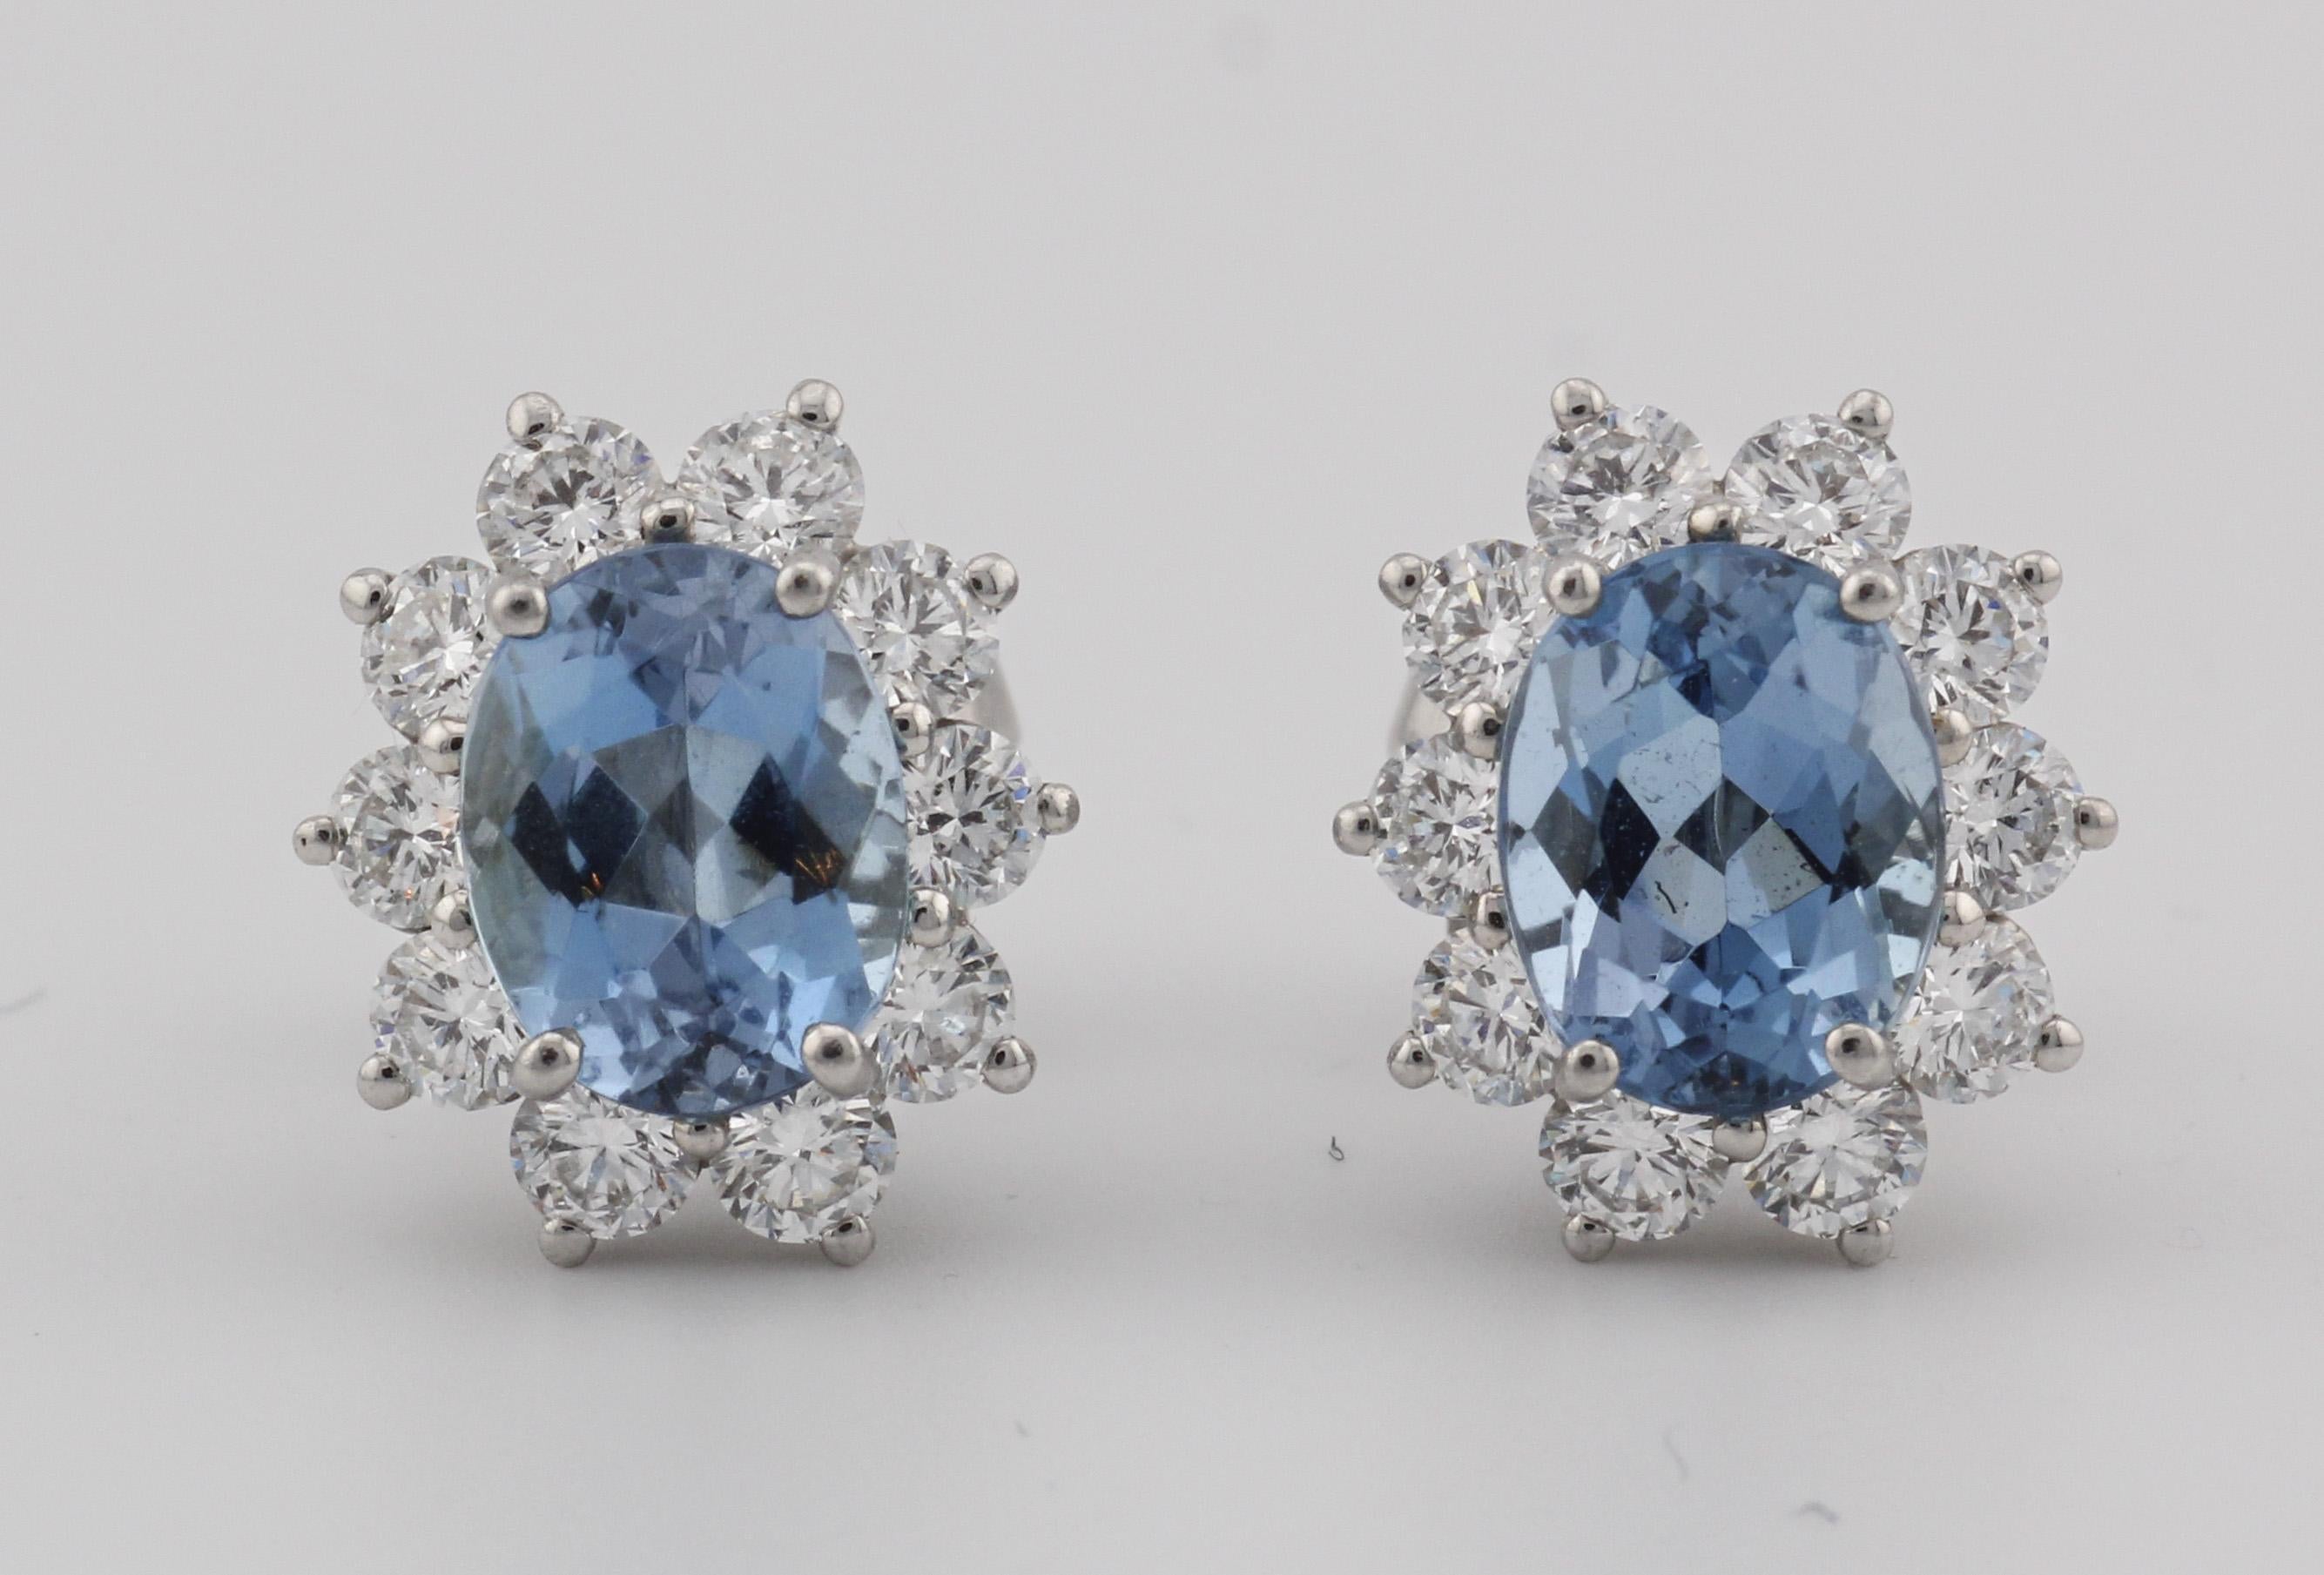 The Tiffany & Co. Aquamarine Diamond Platinum Stud Earrings epitomize elegance and refinement, showcasing the timeless beauty of aquamarine gemstones and exquisite craftsmanship. Created by the iconic jeweler Tiffany & Co., these earrings are a